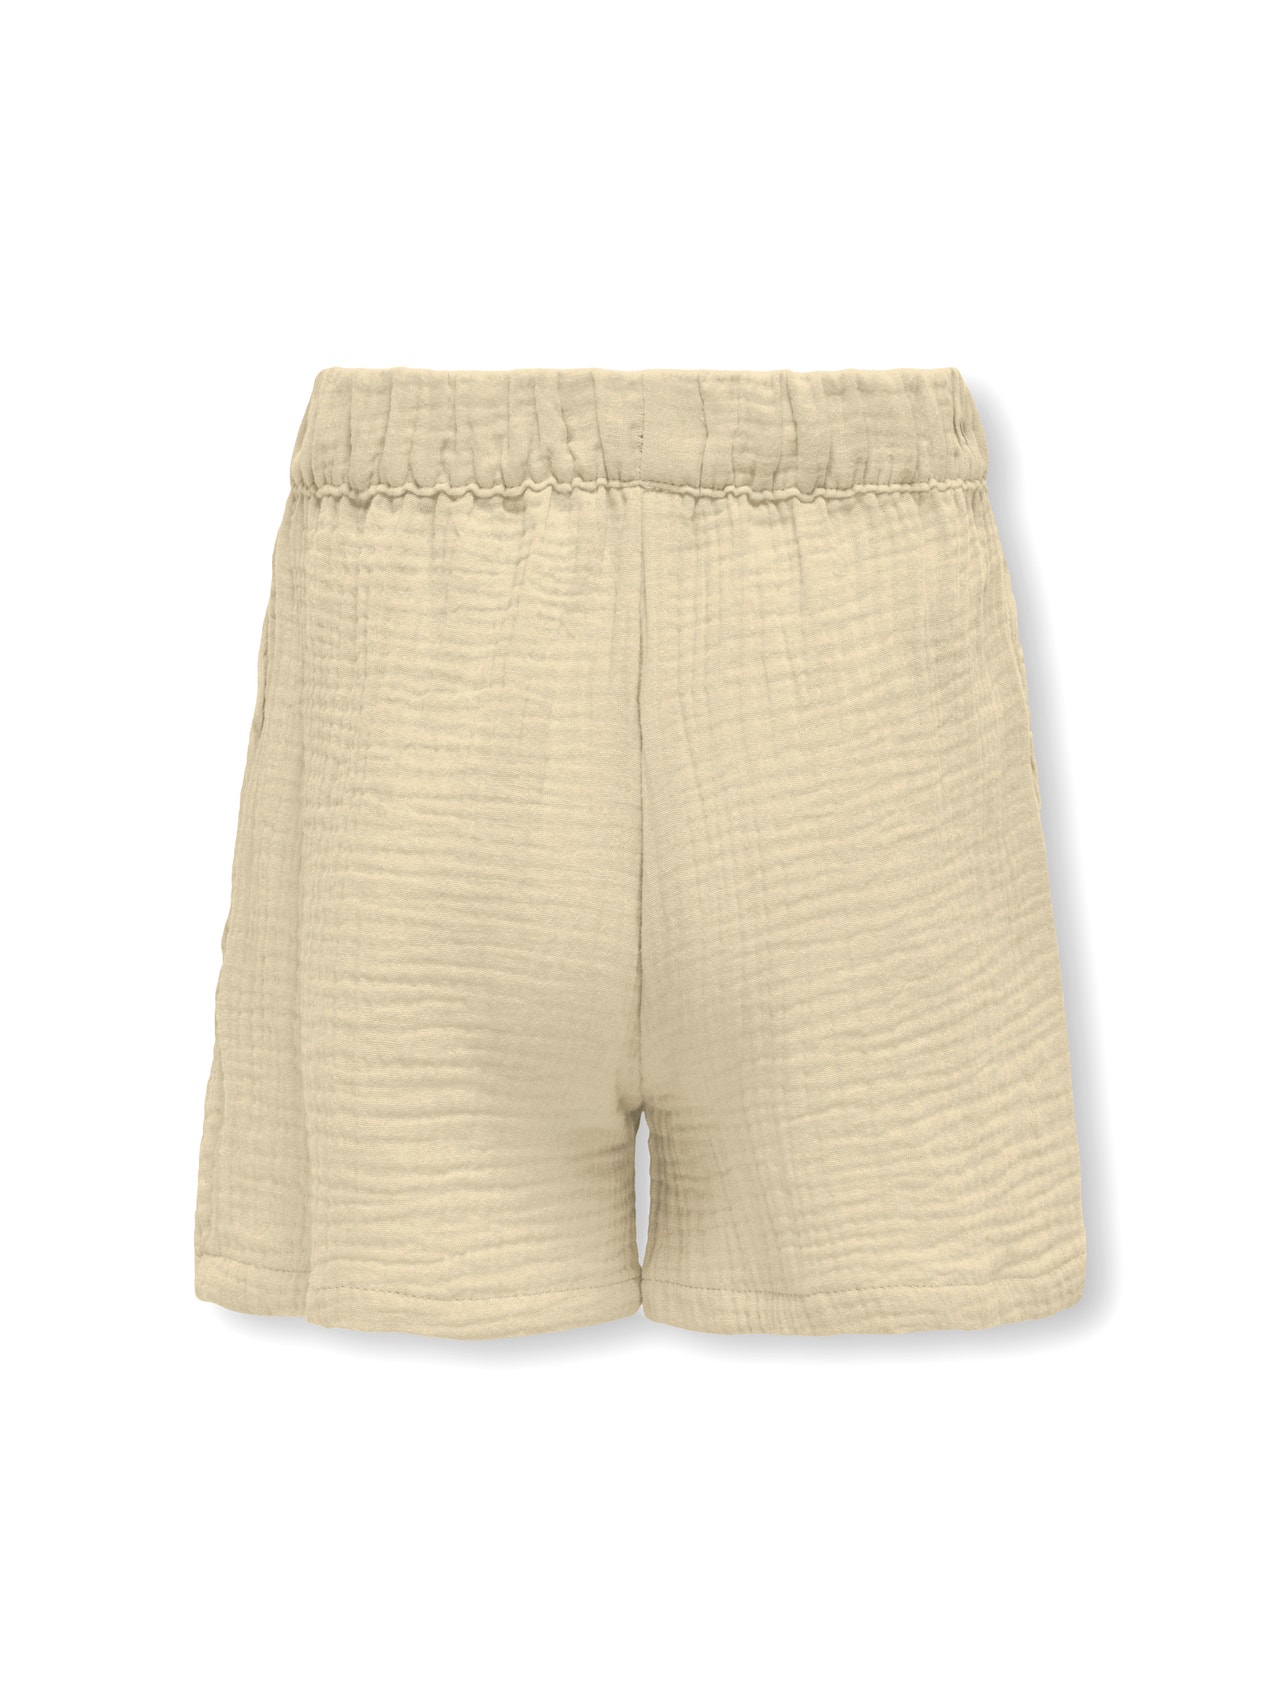 ONLY Normal passform Shorts -Pumice Stone - 15293680